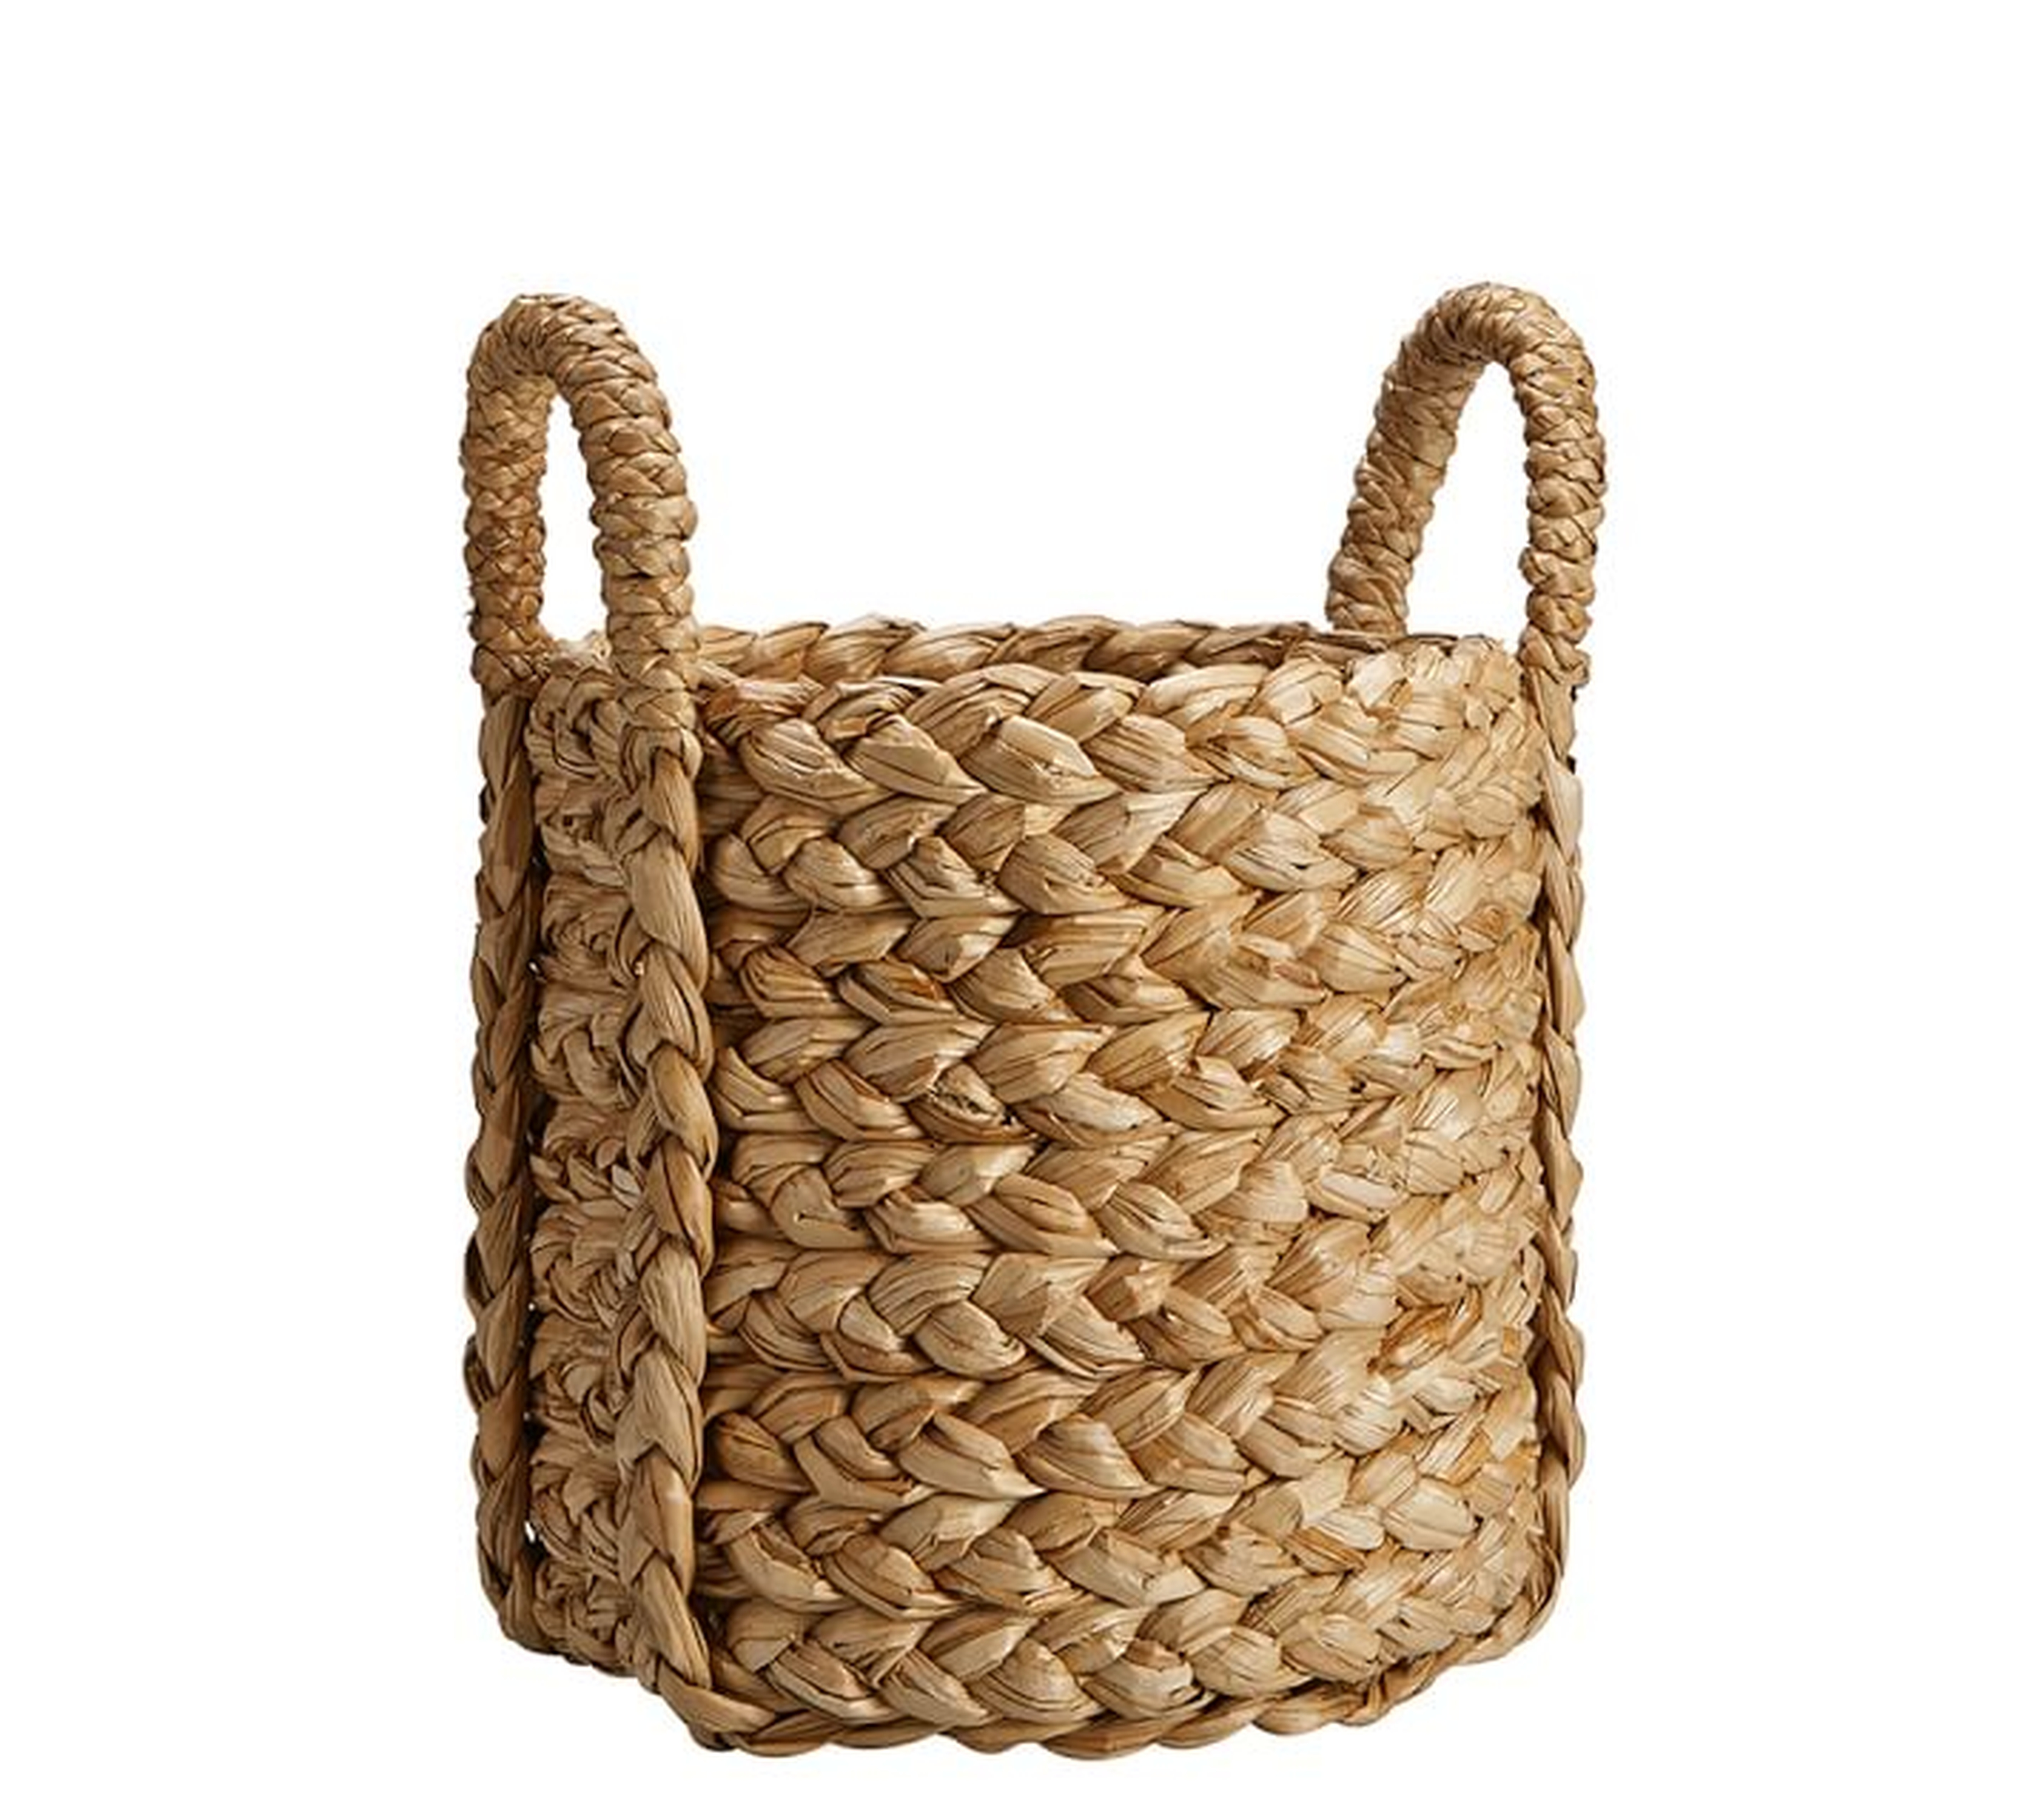 BEACHCOMBER ROUND HANDLED BASKET - Large Tote - Pottery Barn